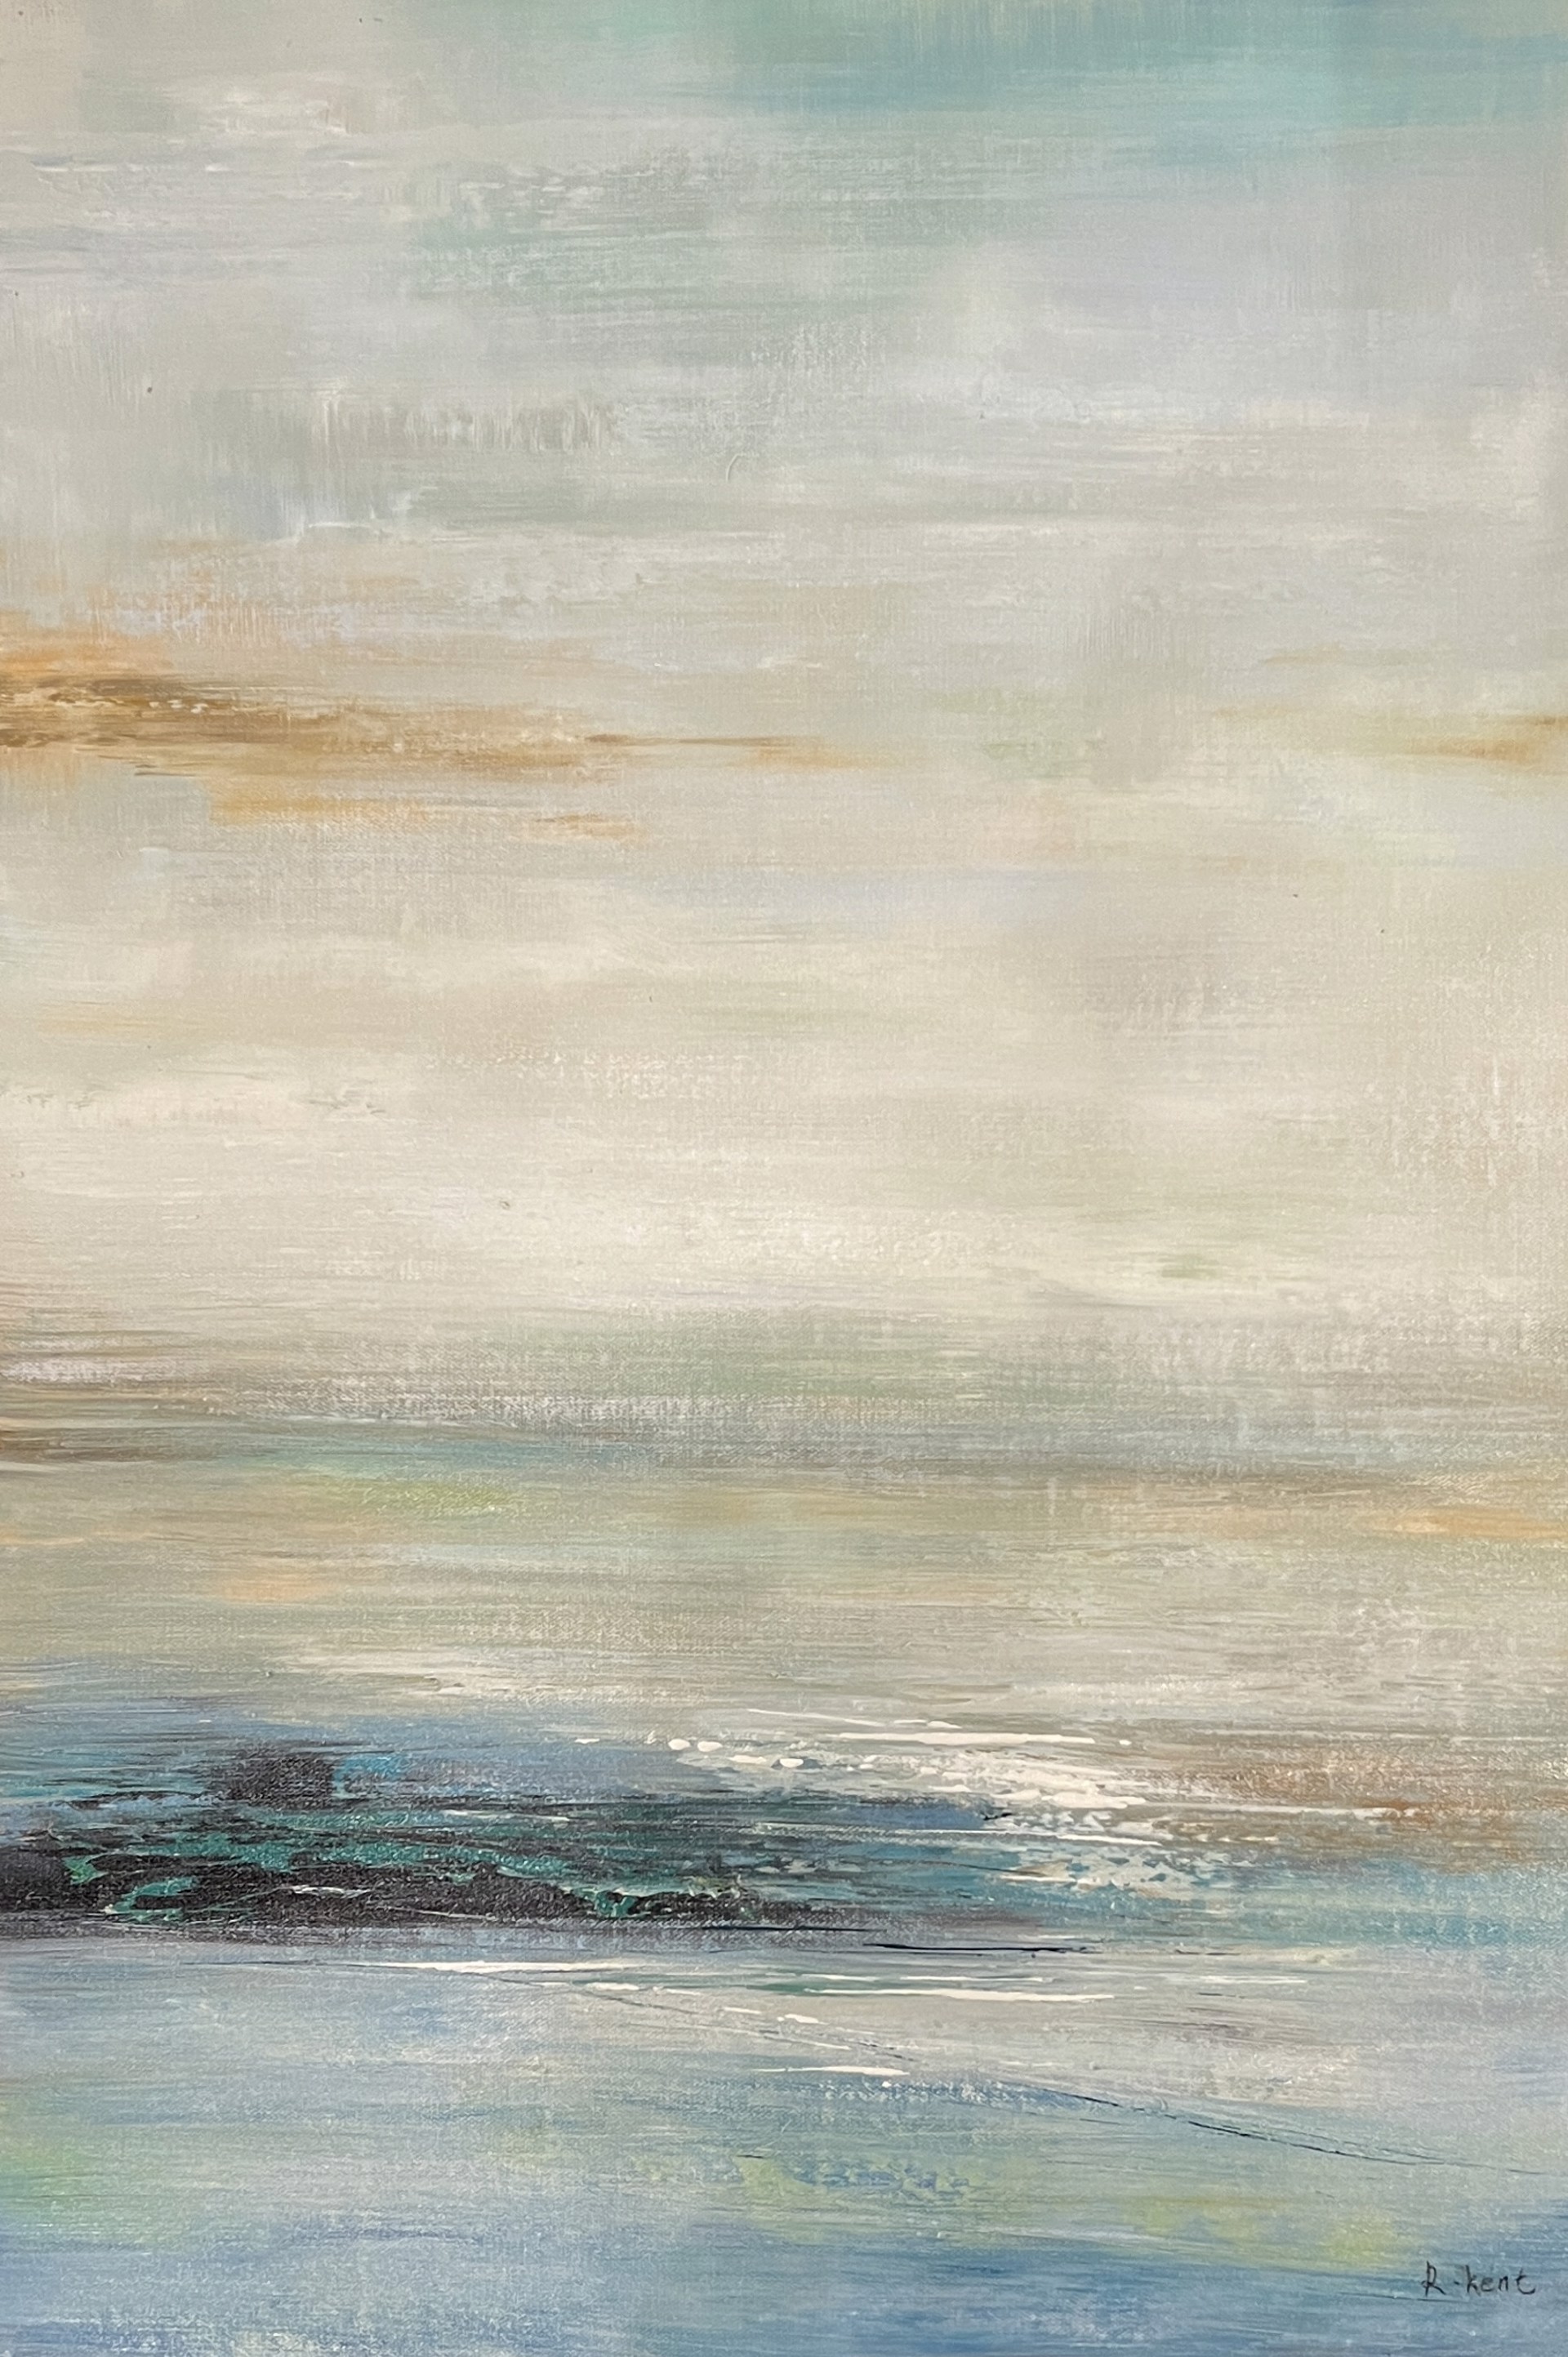 ABSTRACT HORIZON IV by R KENT